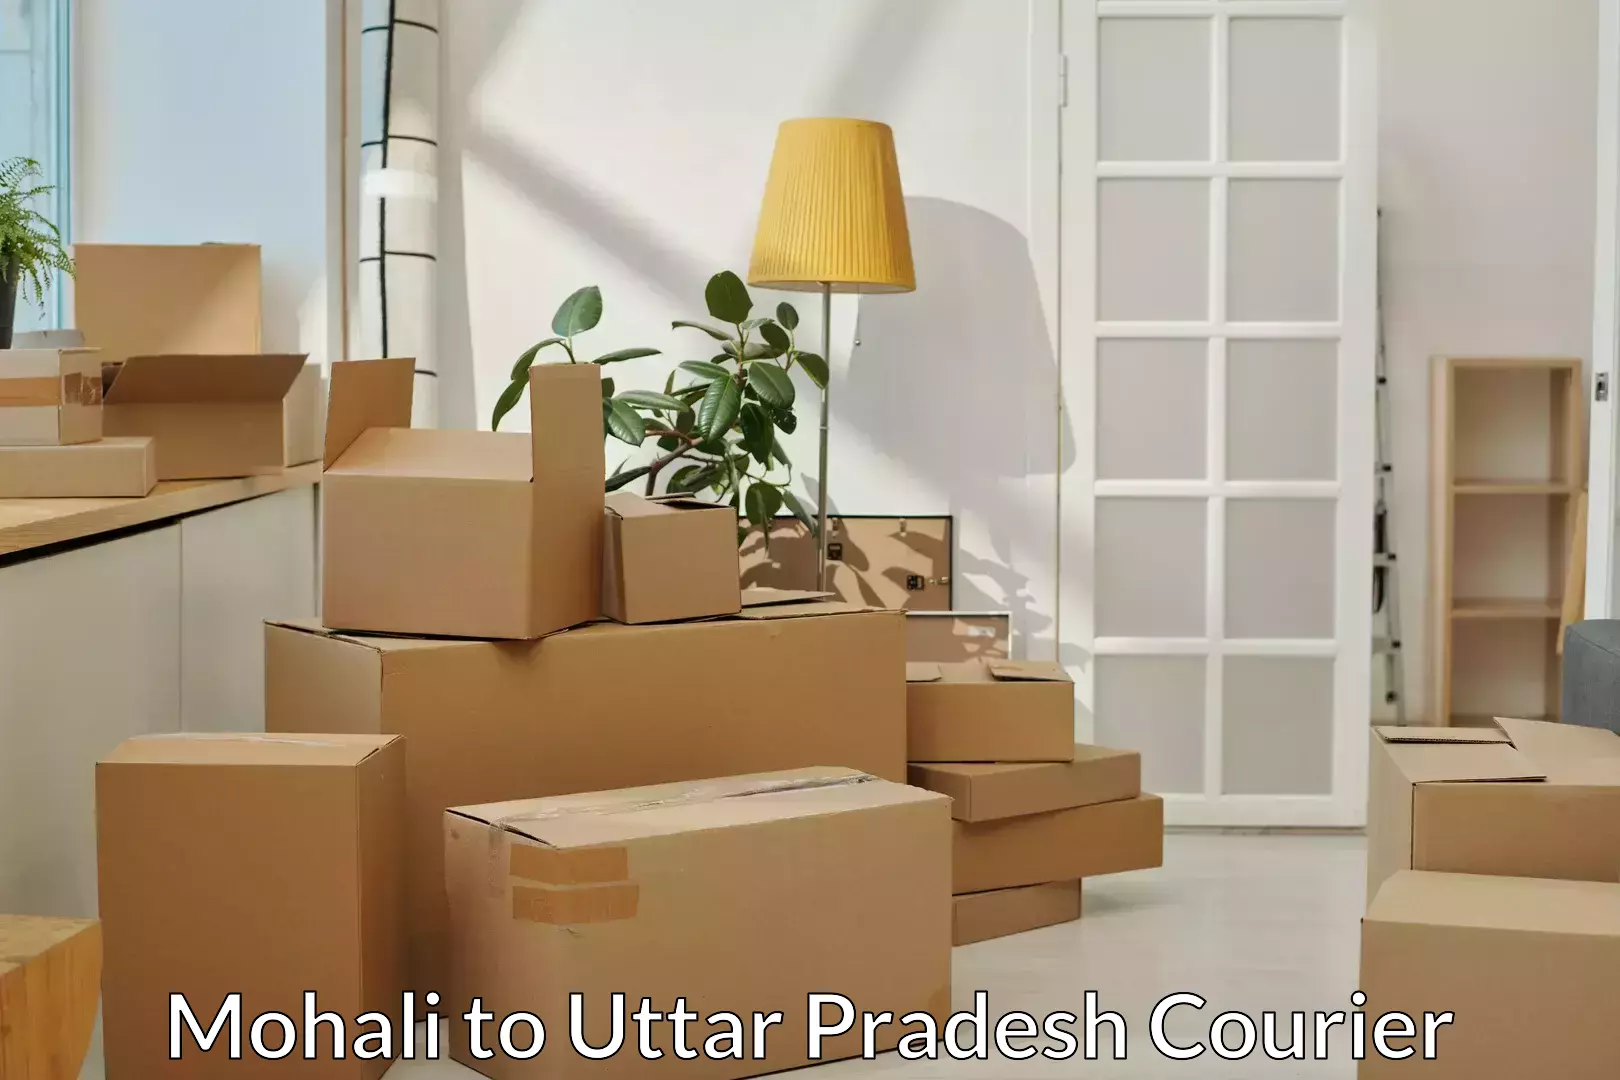 Efficient moving and packing Mohali to Noida